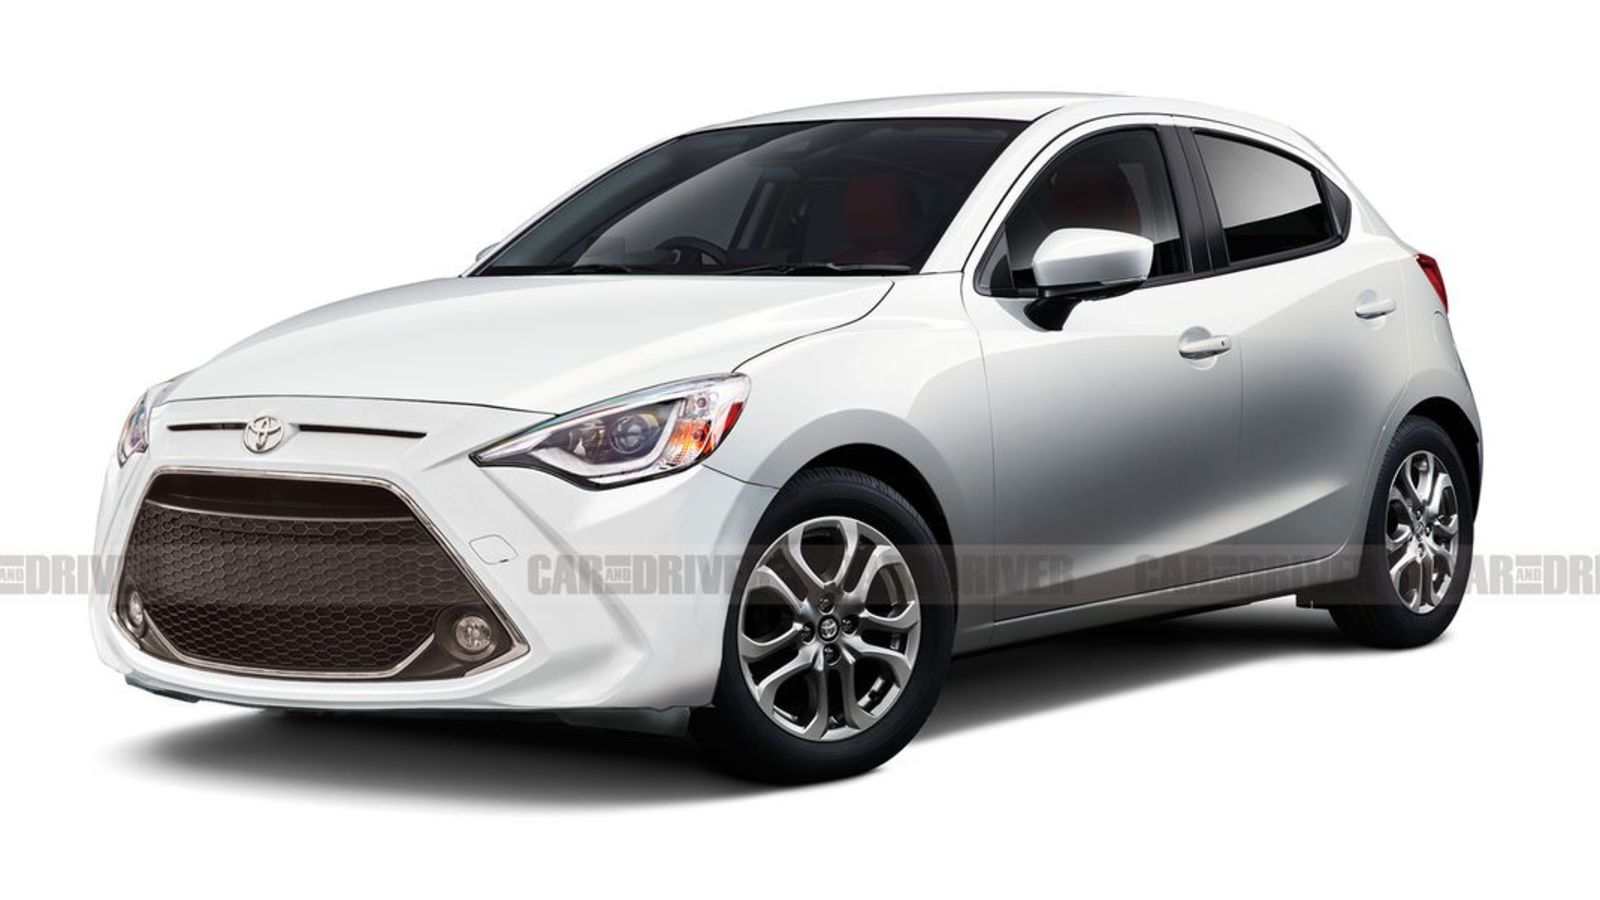 Illustration for article titled Mazda2 hatchback to be sold as a Toyota in the US?